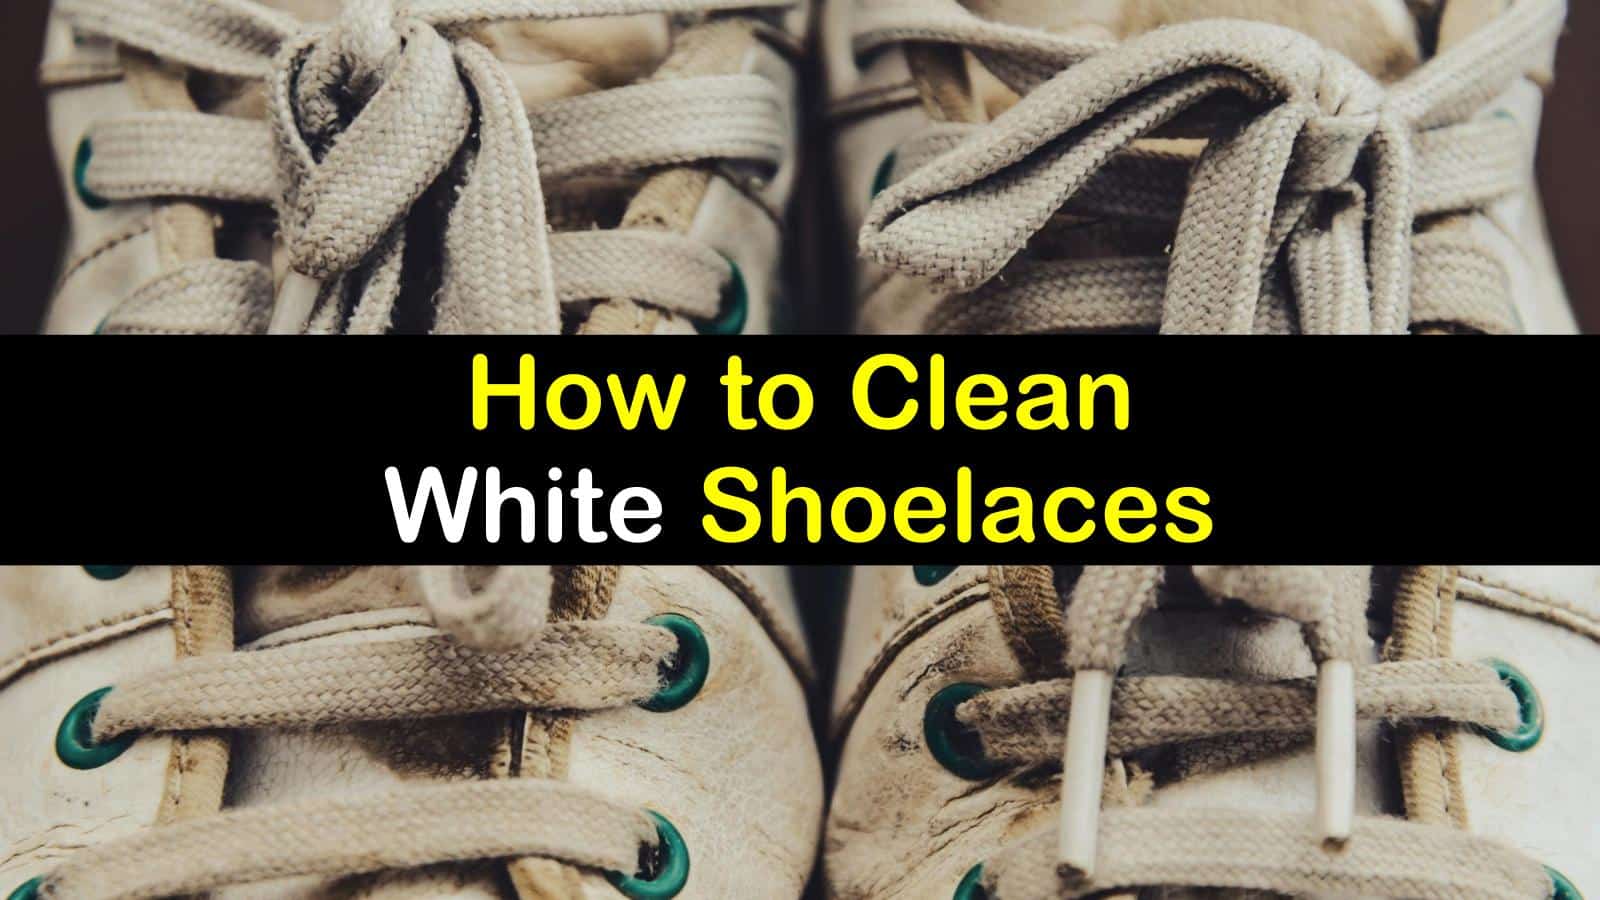 how to clean white shoelaces titleimg1